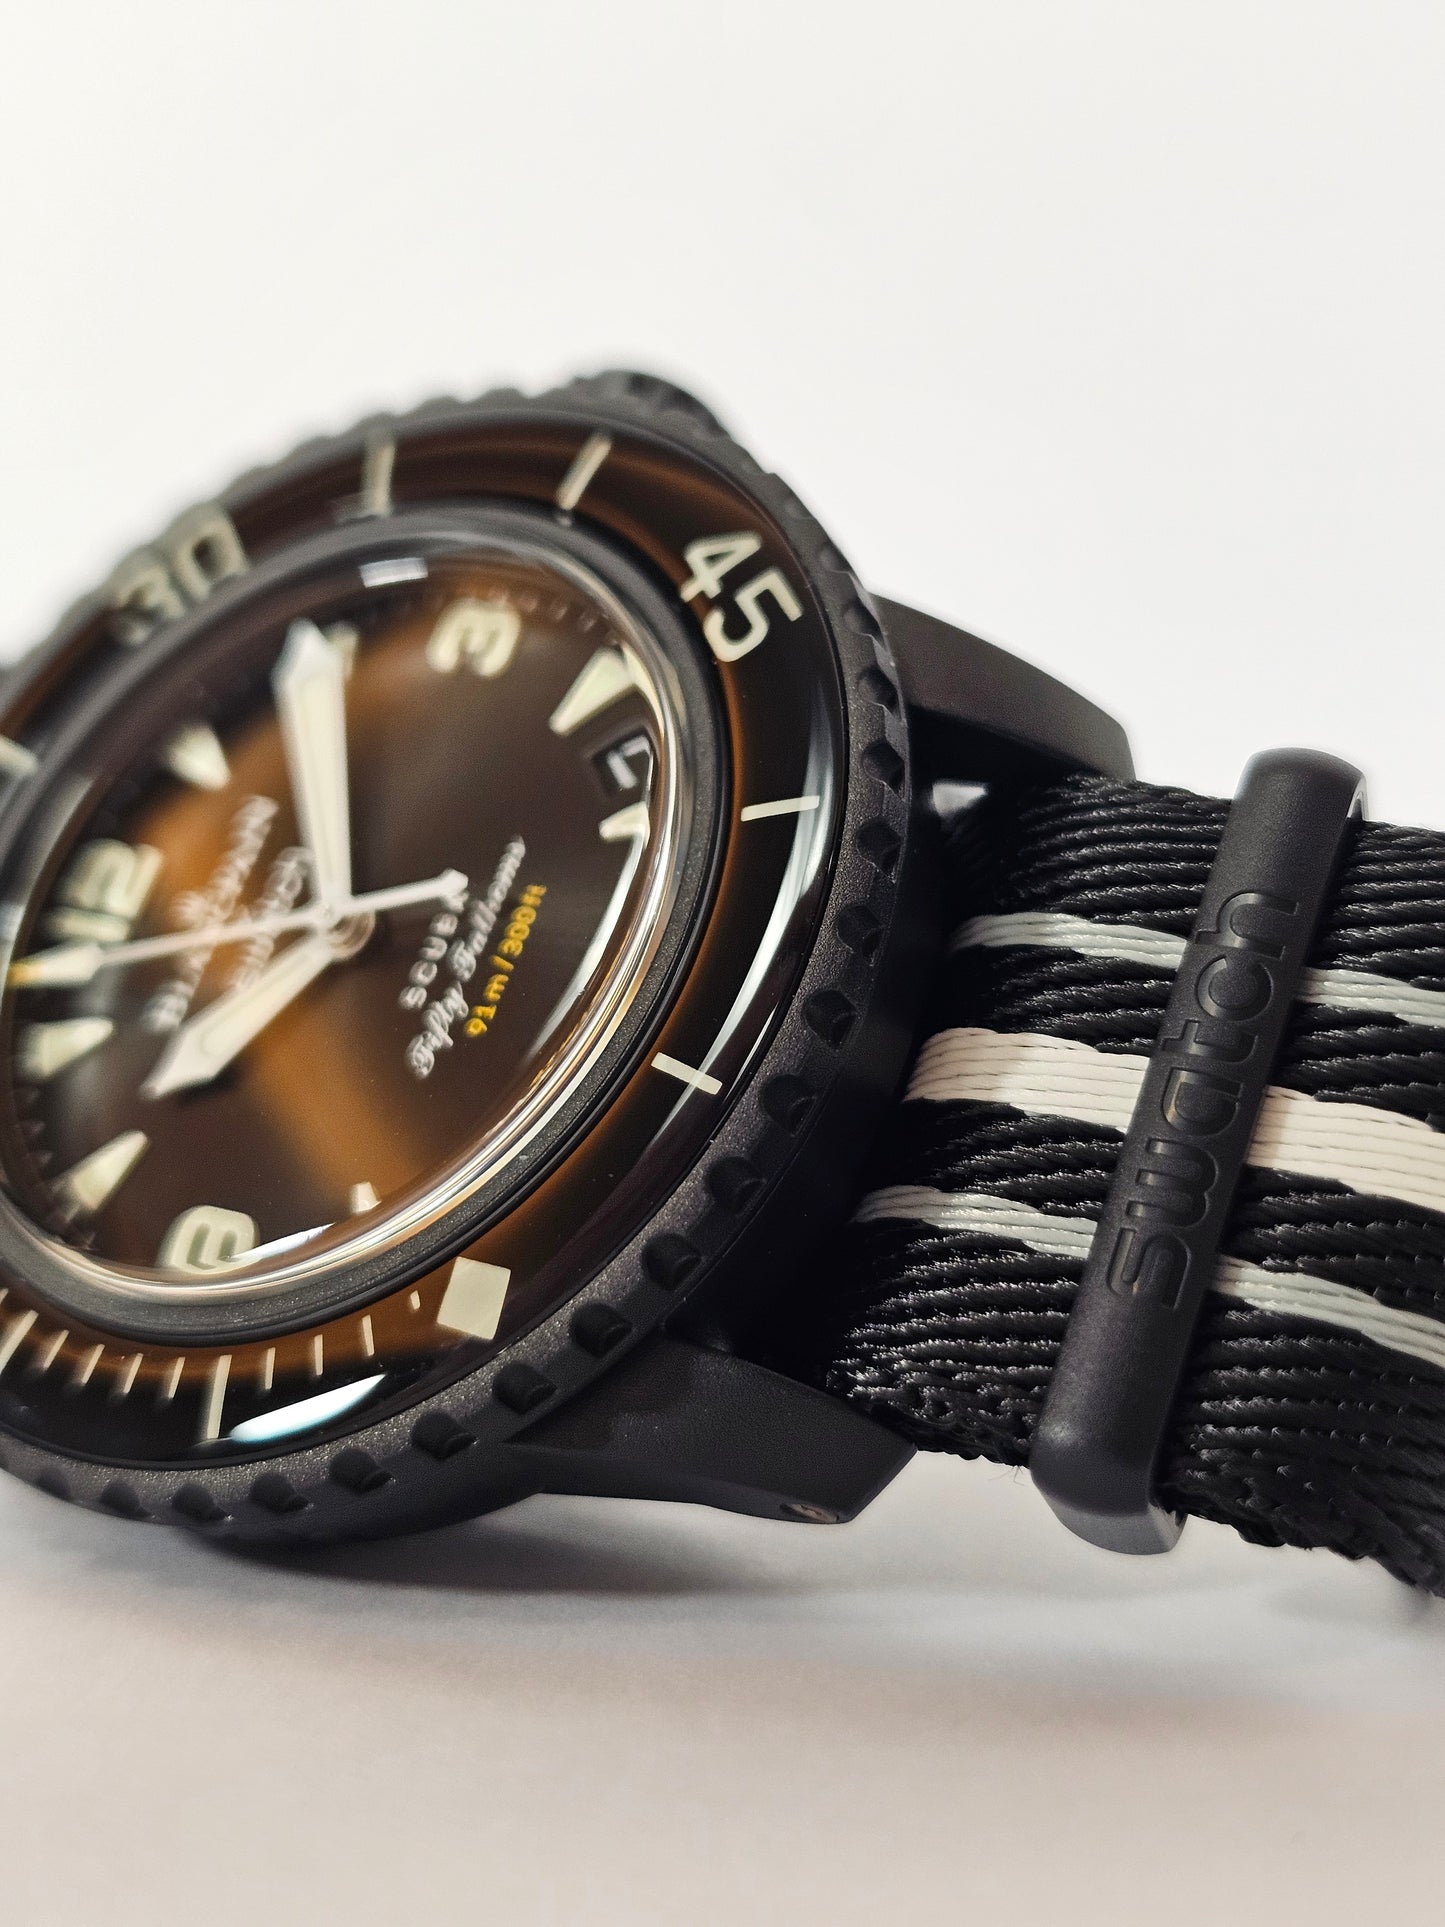 Swatch x Blancpain - Fifty Fathoms Scuba - Ocean of Storms: New Moon